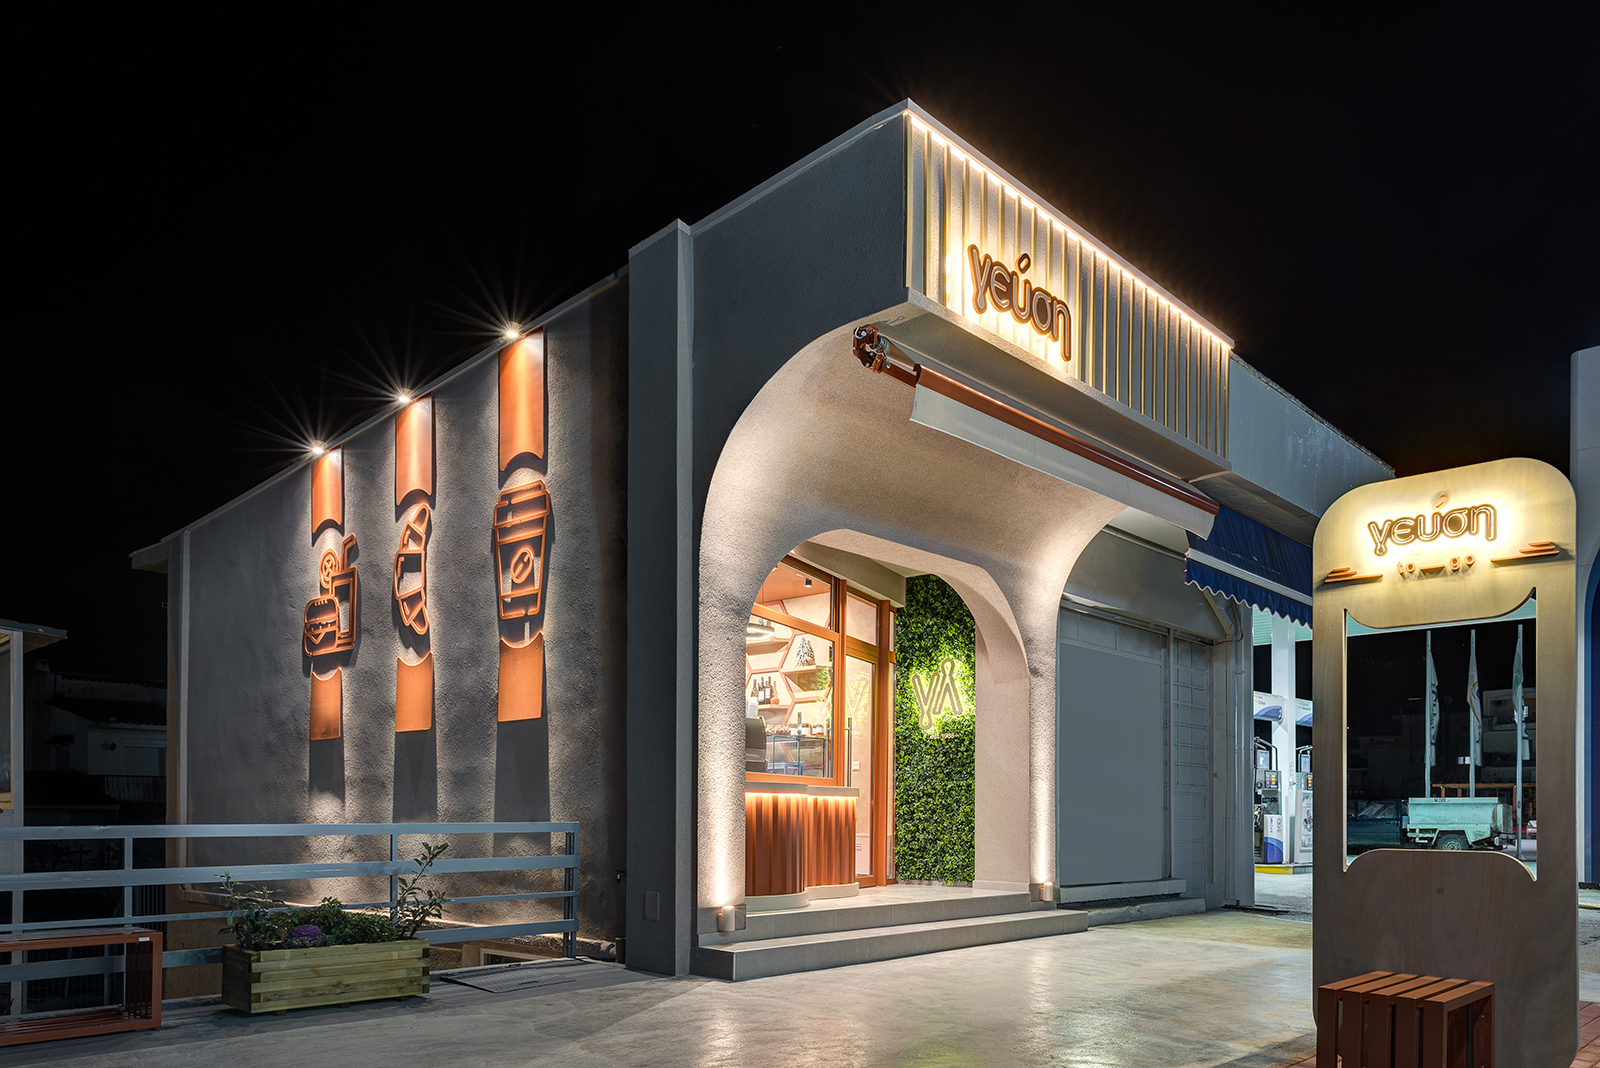 Archisearch Gefsi: a “to go” drive-through Coffee & Food Store in Farsala | by GroundPlan Architects